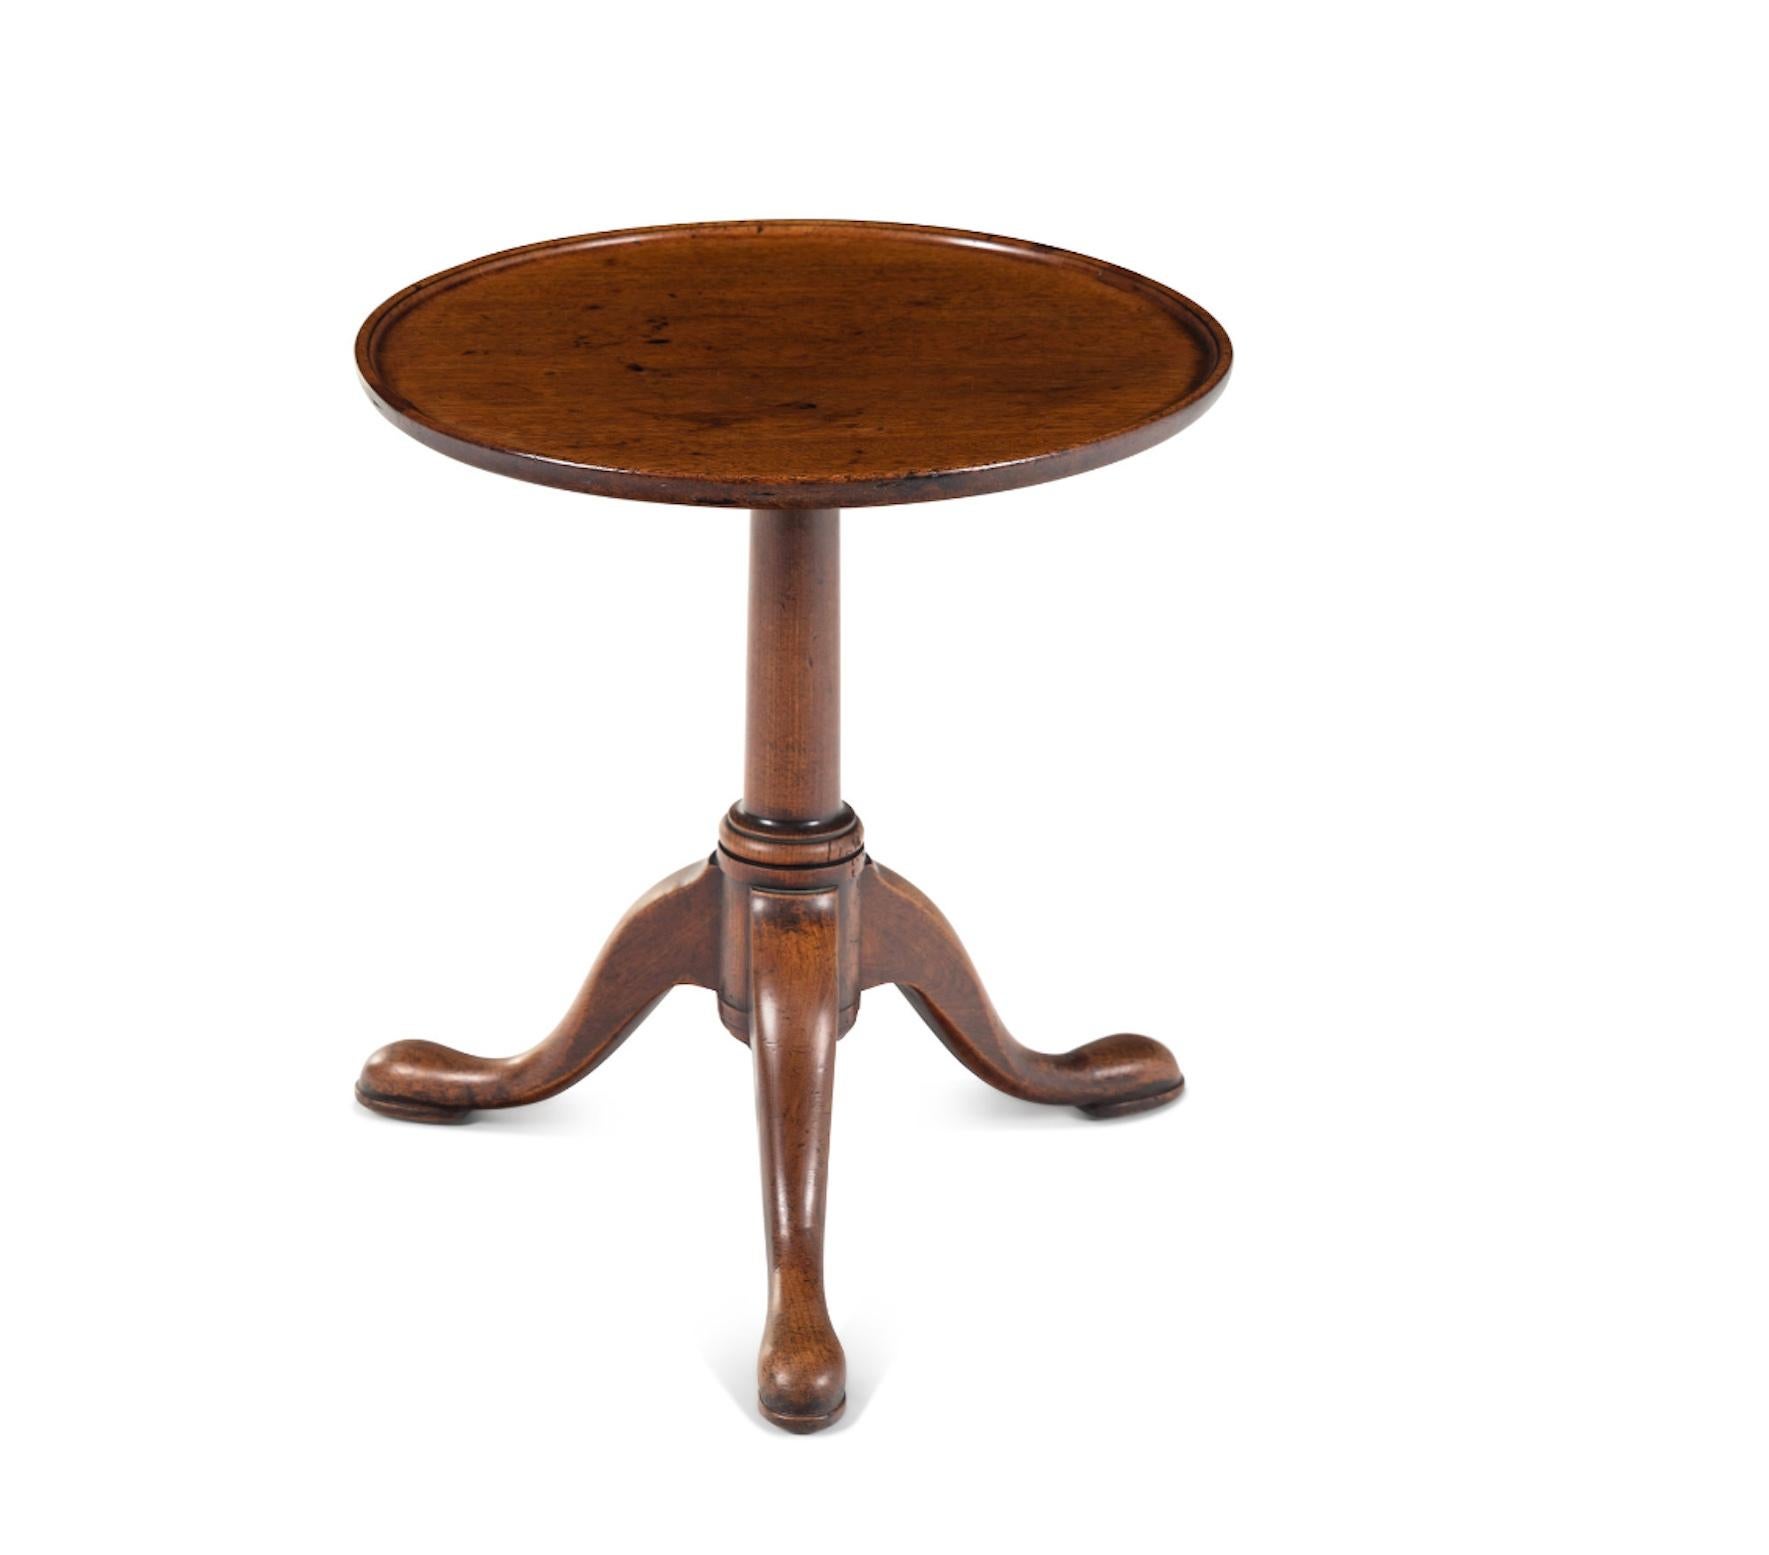 A George II Walnut Side Table or Candle Stand
Mid 18th Century and Adapted
Height 19 1/2 x diameter 17 1/4 inches.
This lot is located in Chicago.
Property from the Estate of Ruthann 